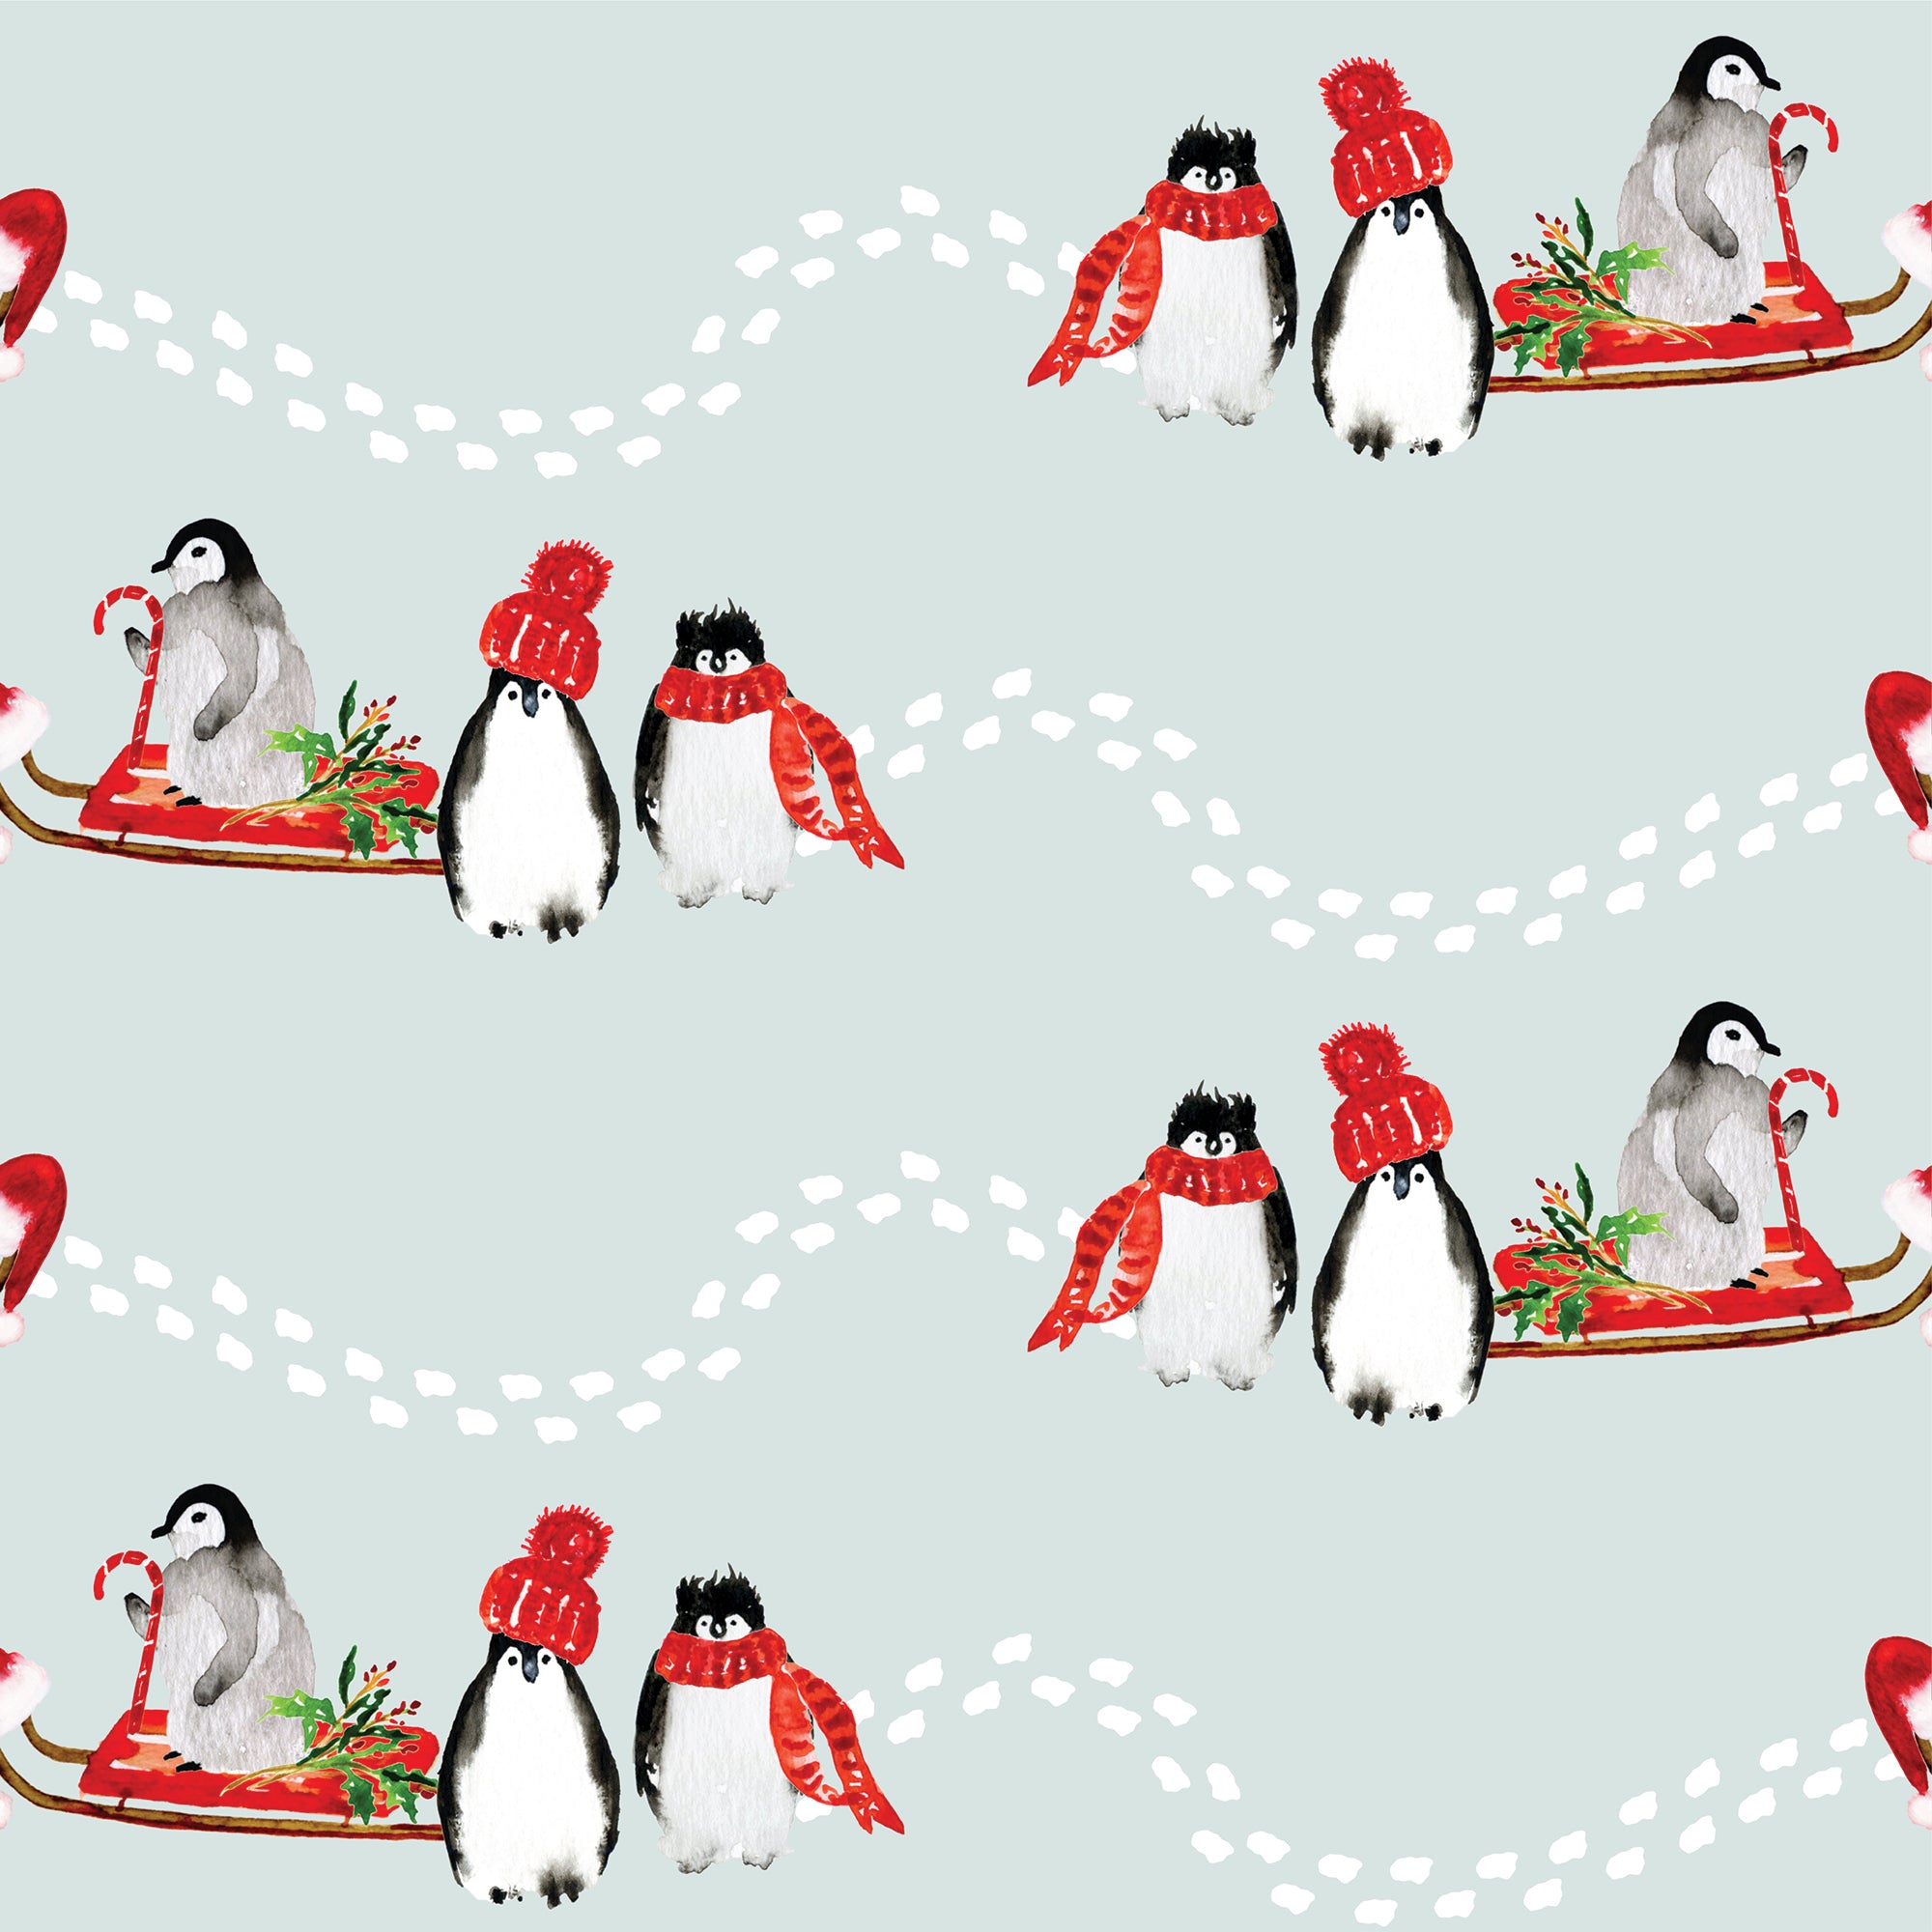 Penguins in a sled with red hats and scarfs